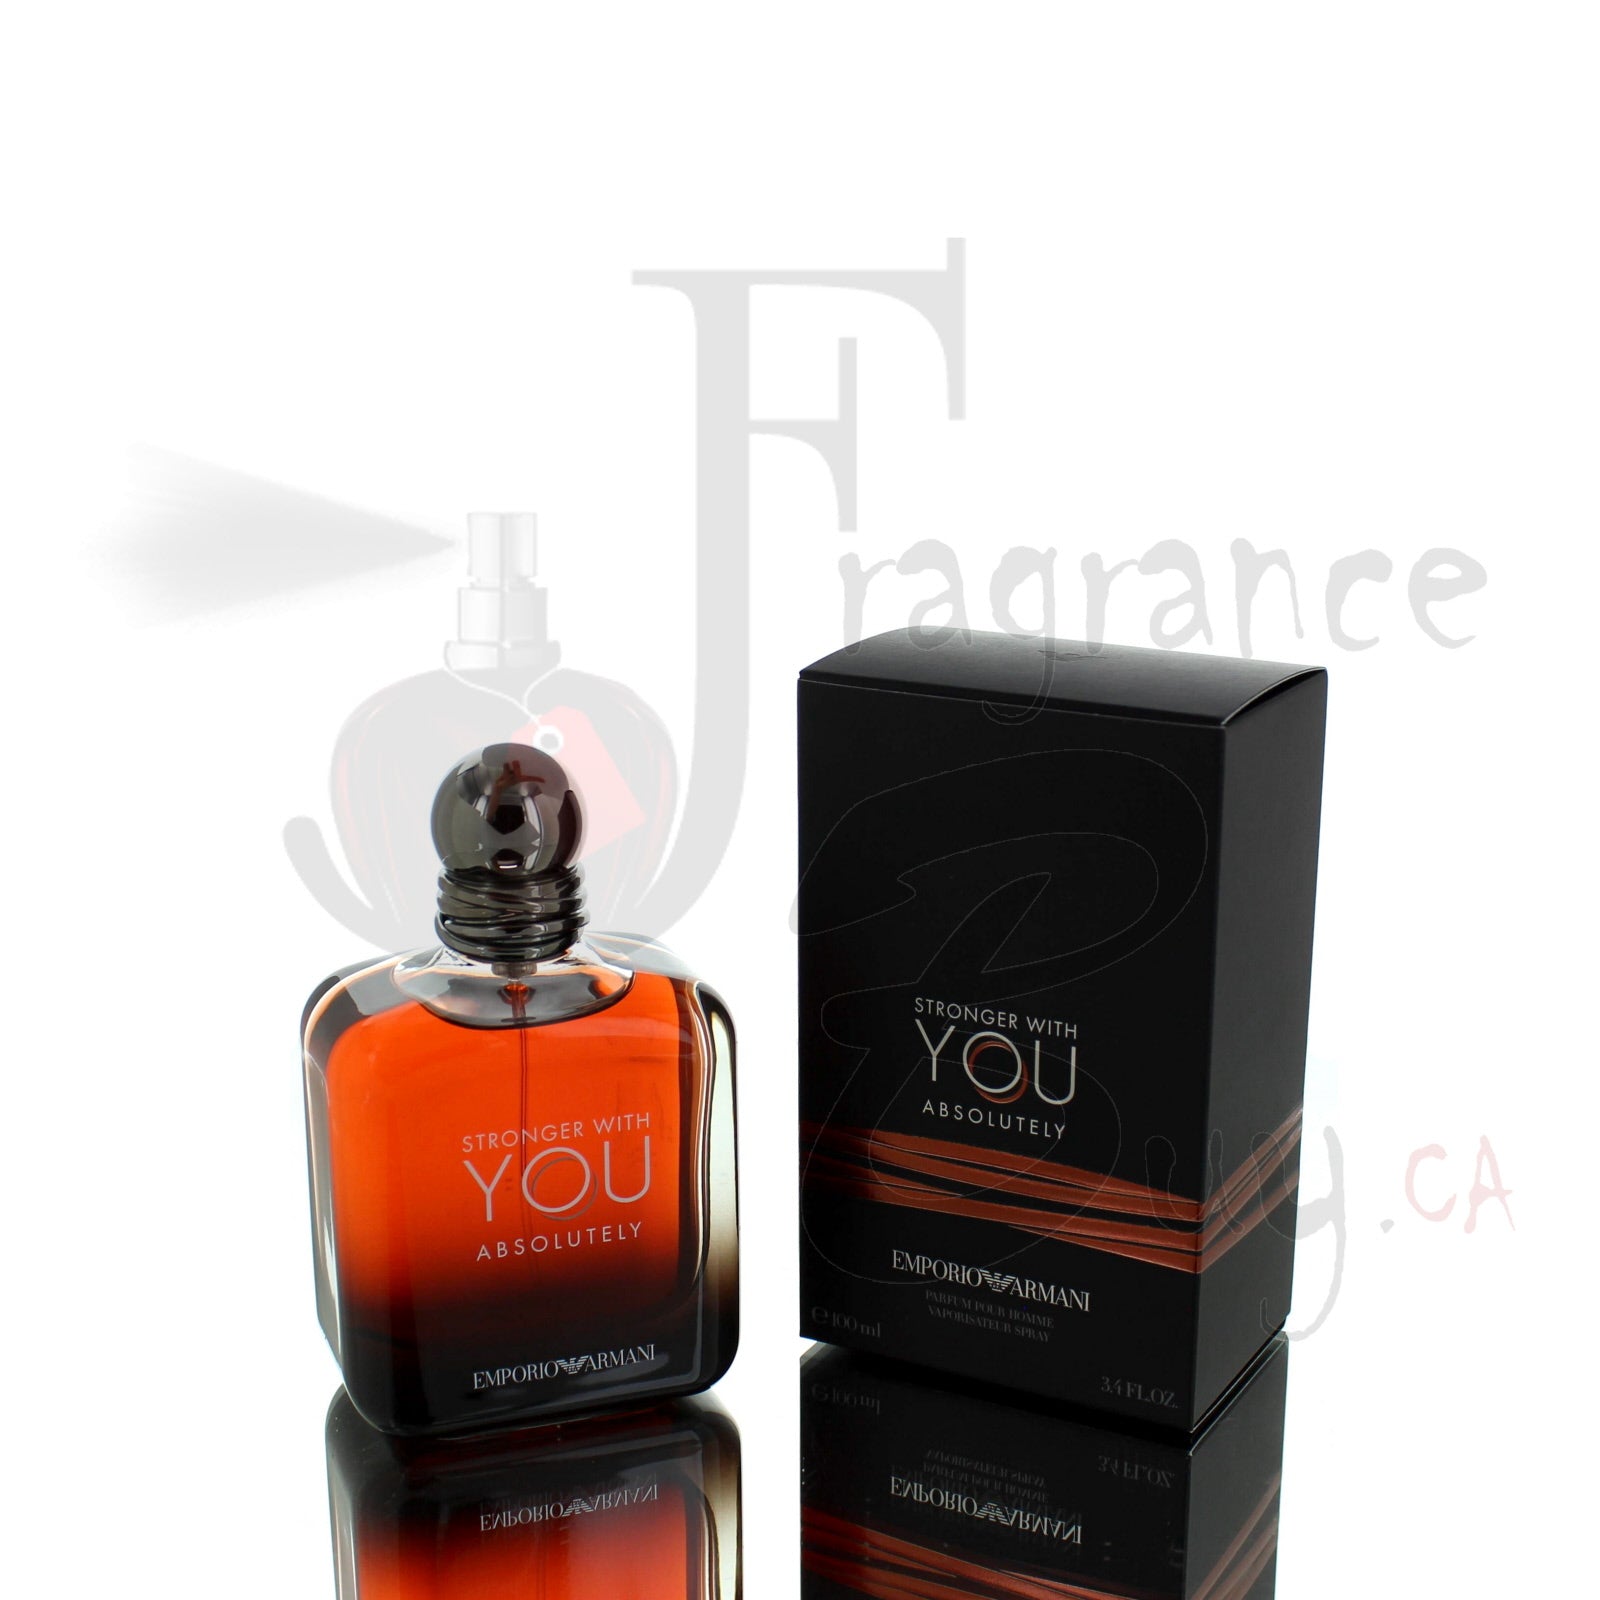  — Giorgio Armani Stronger with You Absolutely Perfume Best  Price Canada